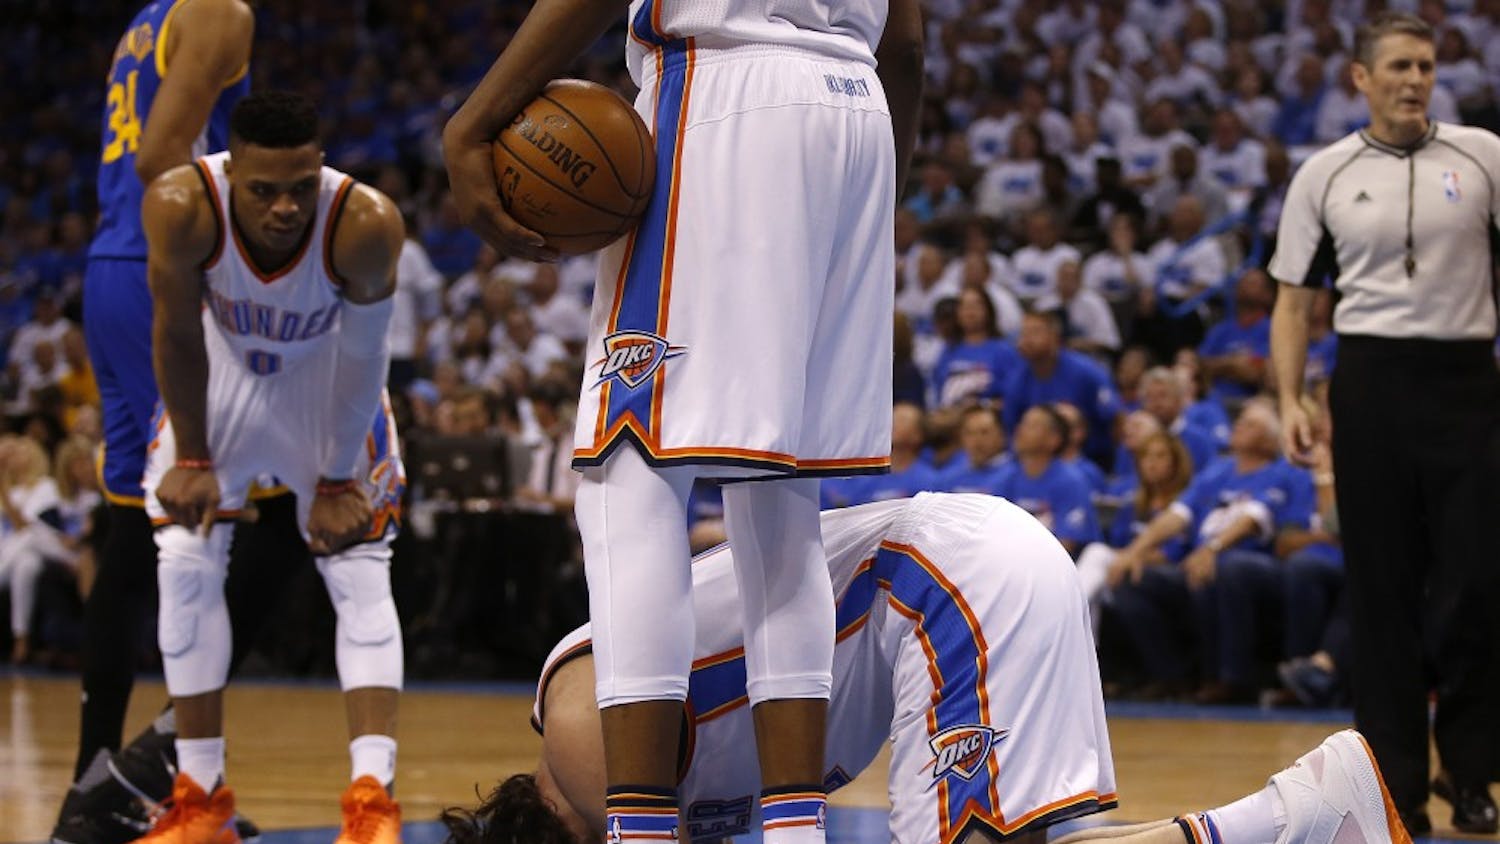 Oklahoma City Thunder's Steven Adams (12) kneels on the ground after being kicked by Golden State Warriors' Draymond Green (23) during the second quarteron Sunday, May 22, 2016, at Chesapeake Energy Arena in Oklahoma City. (Nhat V. Meyer/Bay Area News Group/TNS)